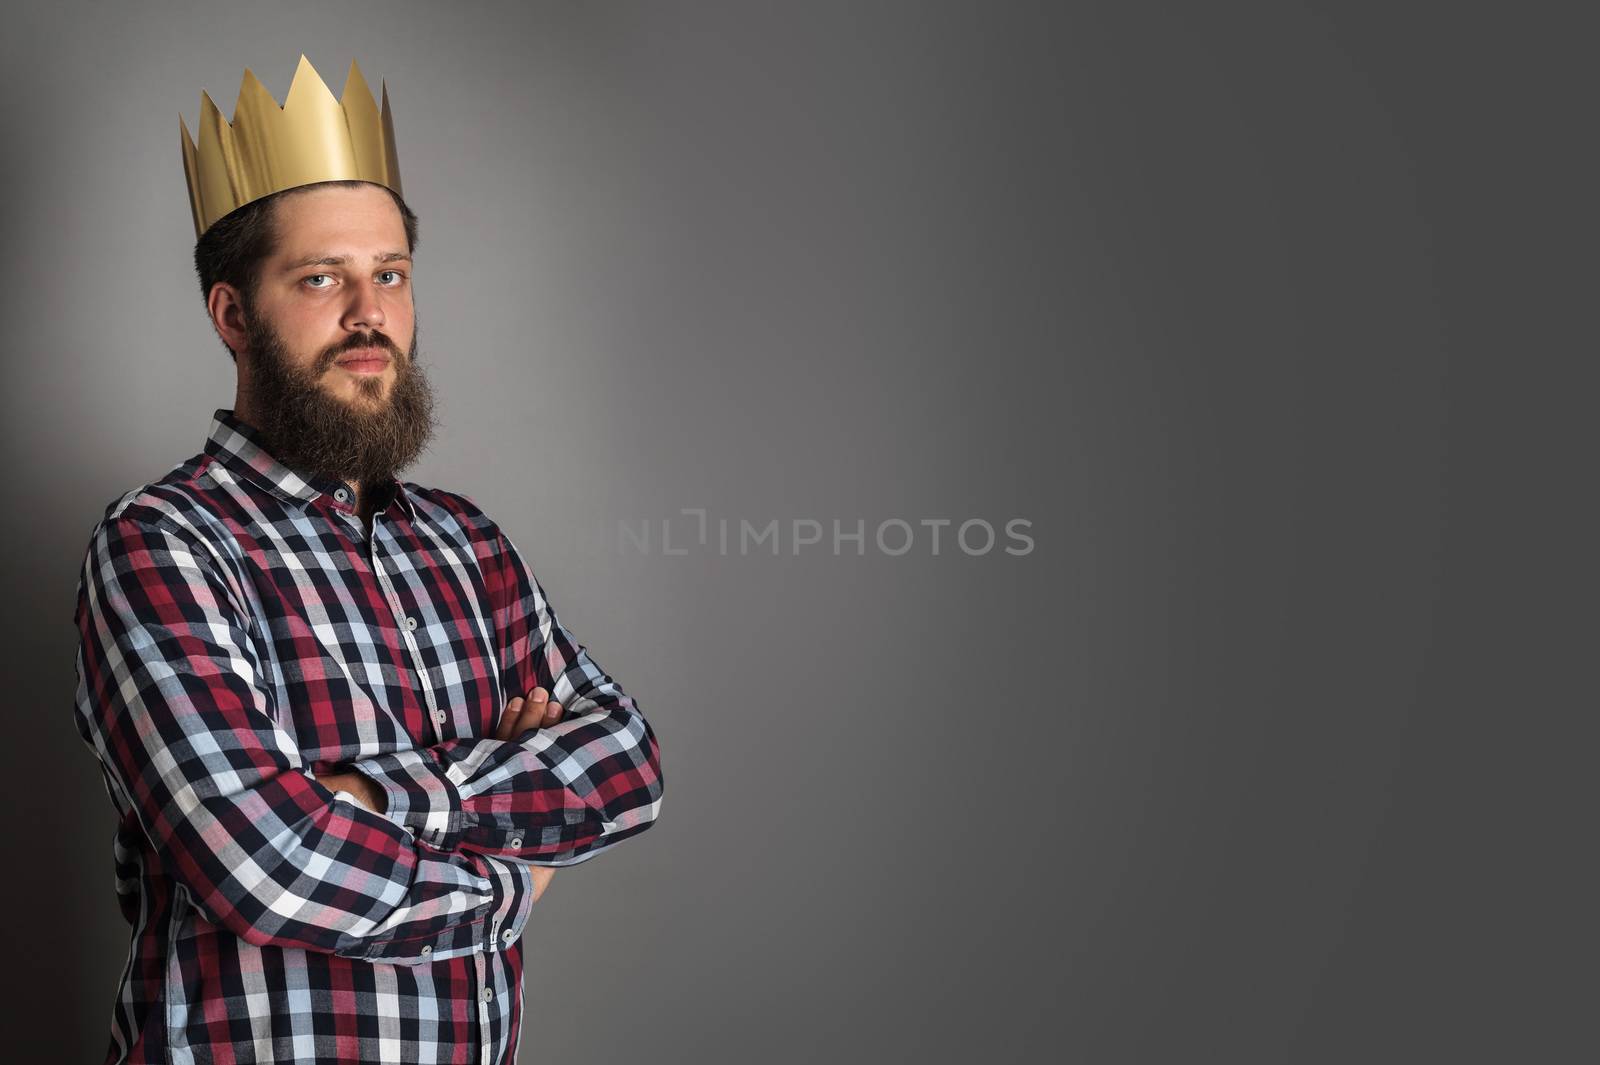 Bearded man in golden crown looking at camera while standing with crossed arms on gray background